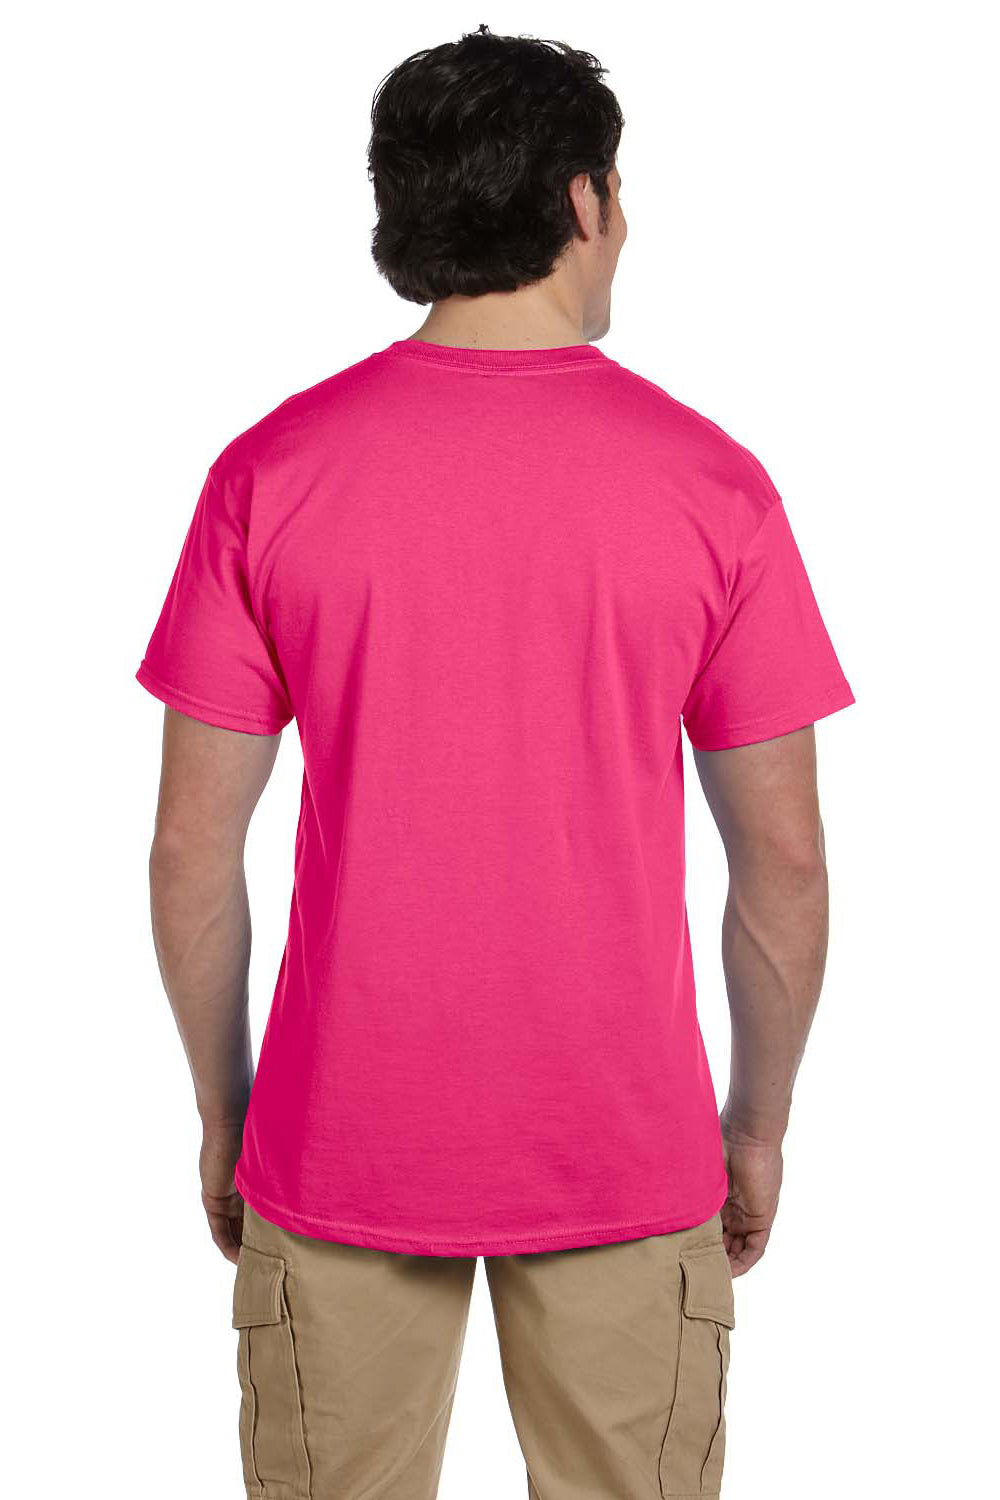 Fruit Of The Loom 3931 Mens HD Jersey Short Sleeve Crewneck T-Shirt Cyber Pink Back